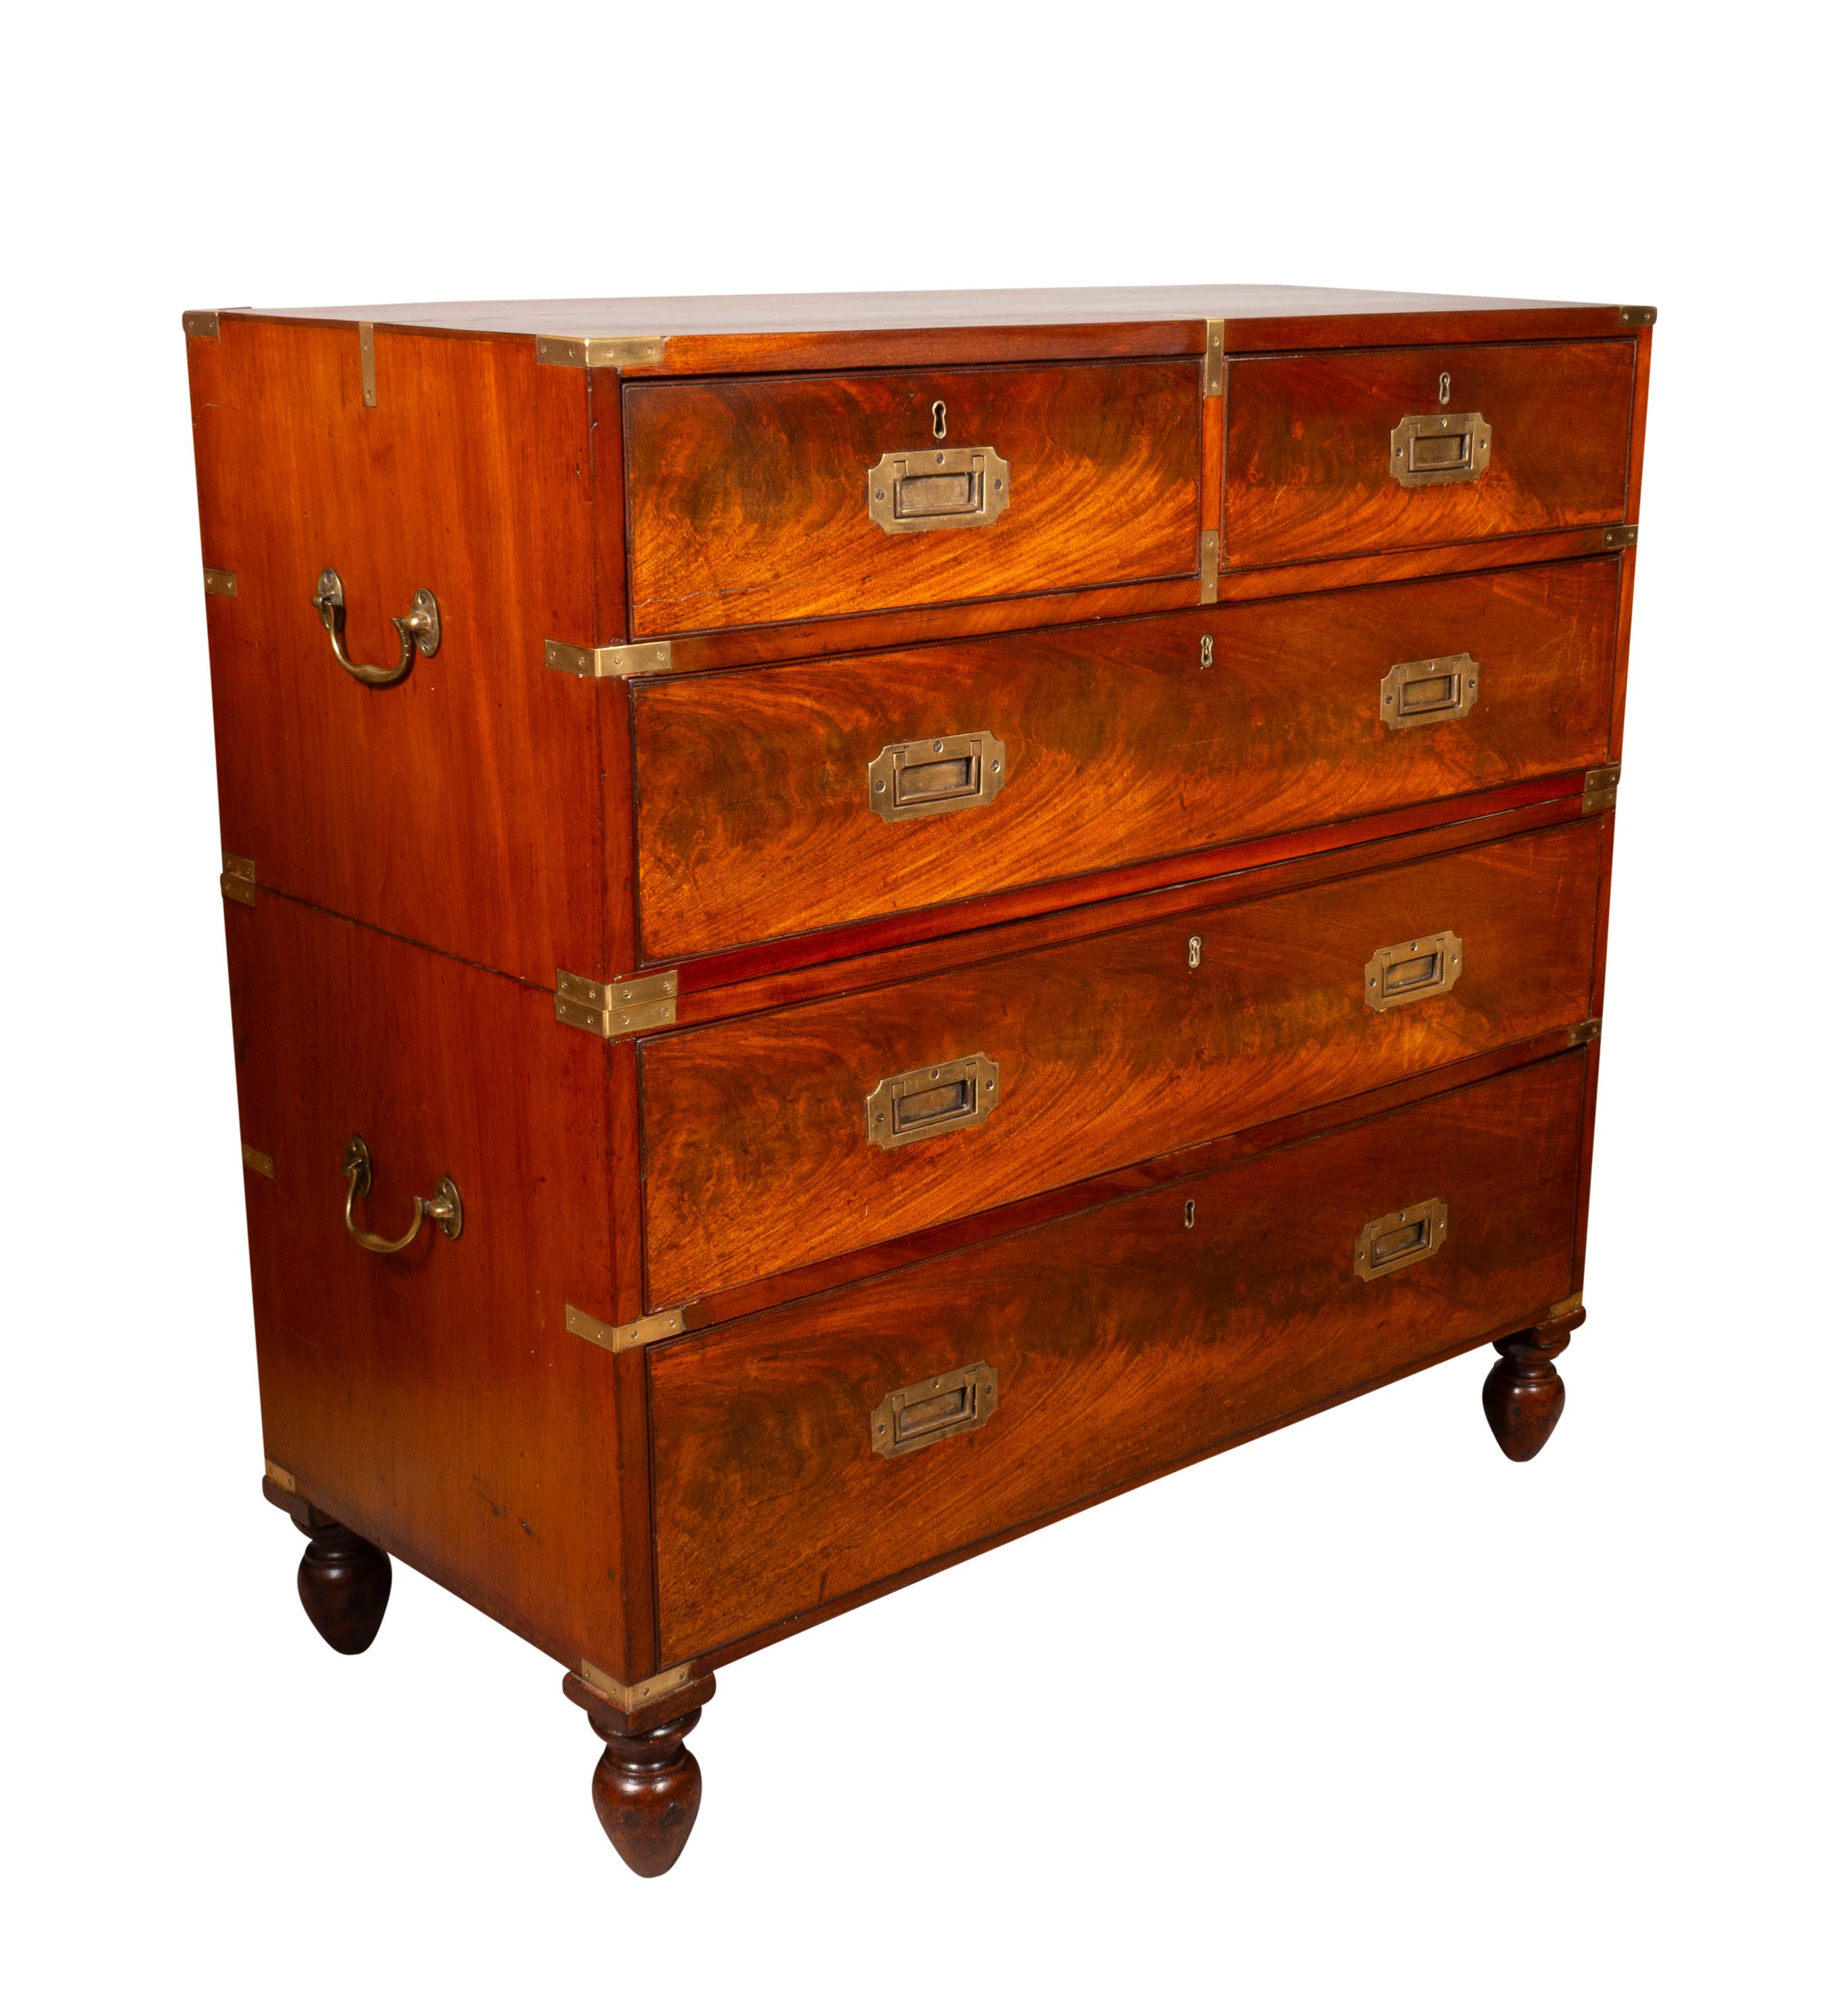 In two sections. Rectangular top with brass corners with two over three drawers. Inset brass handles and side carrying handles. Turned feet. This was possibly converted from a regular chest to a campaign chest or the handles were replaced.